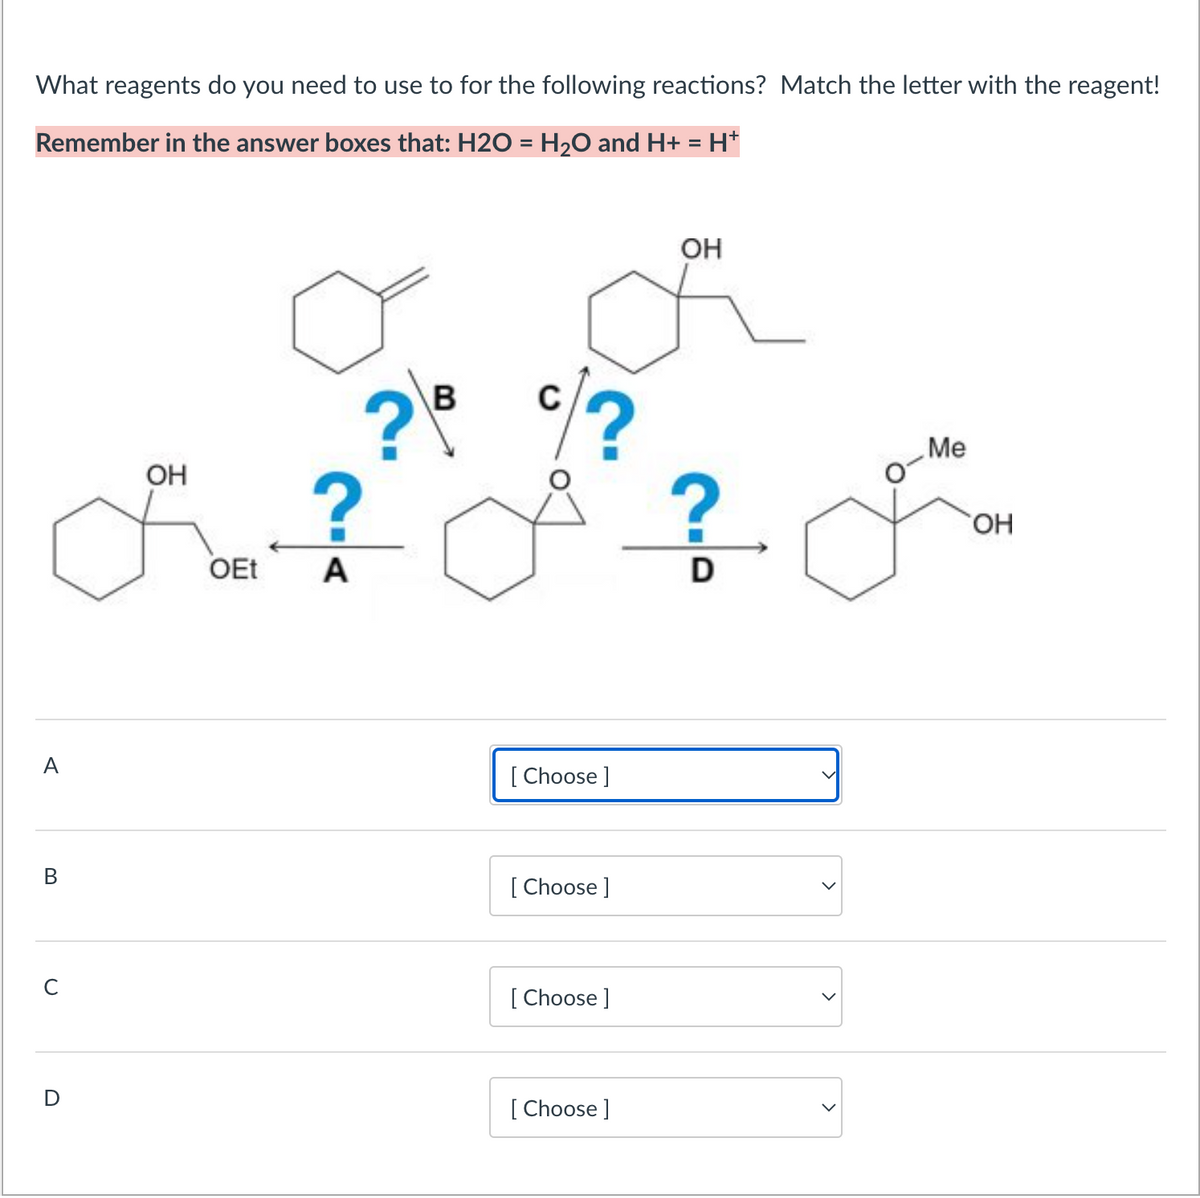 What reagents do you need to use to for the following reactions? Match the letter with the reagent!
Remember in the answer boxes that: H2O = H₂O and H+ = H+
B
с
D
OH
OEt
B
C
? ?
?
A
[Choose ]
[Choose ]
[Choose ]
[Choose ]
OH
D
Me
OH